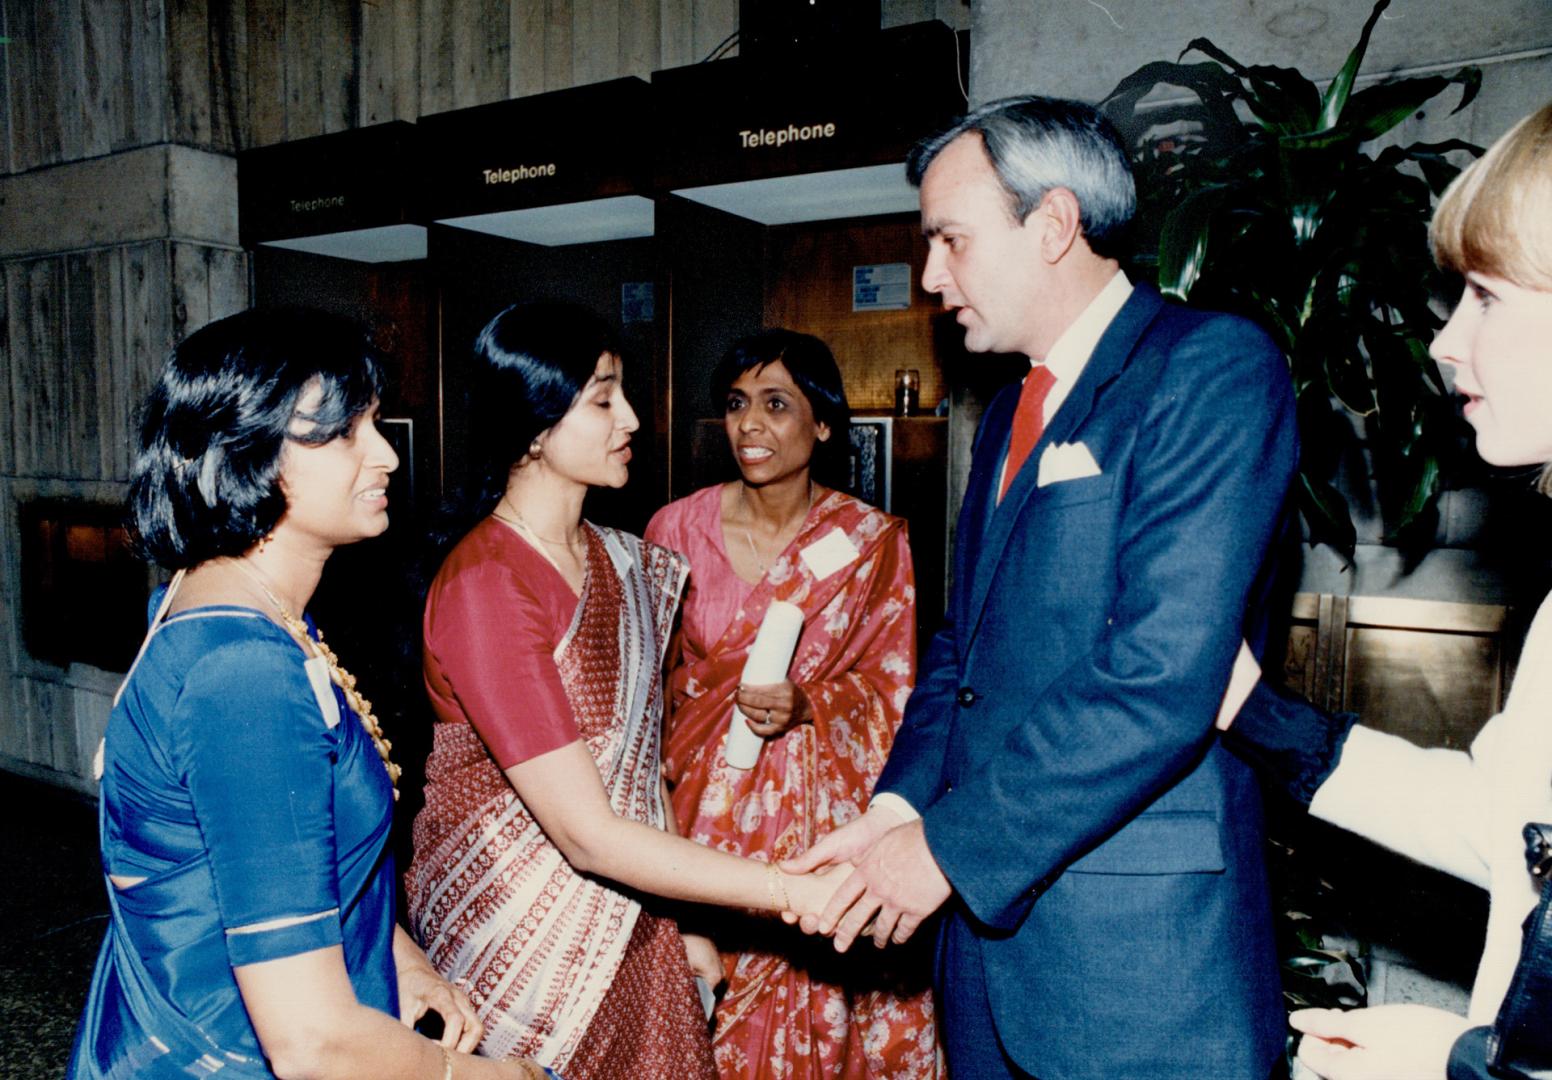 Tribute to victims, Ontario Premier David Peterson shakes hands with Jay Lakshman, who lost her husband and daughter in the crash of Air-India flight (...)